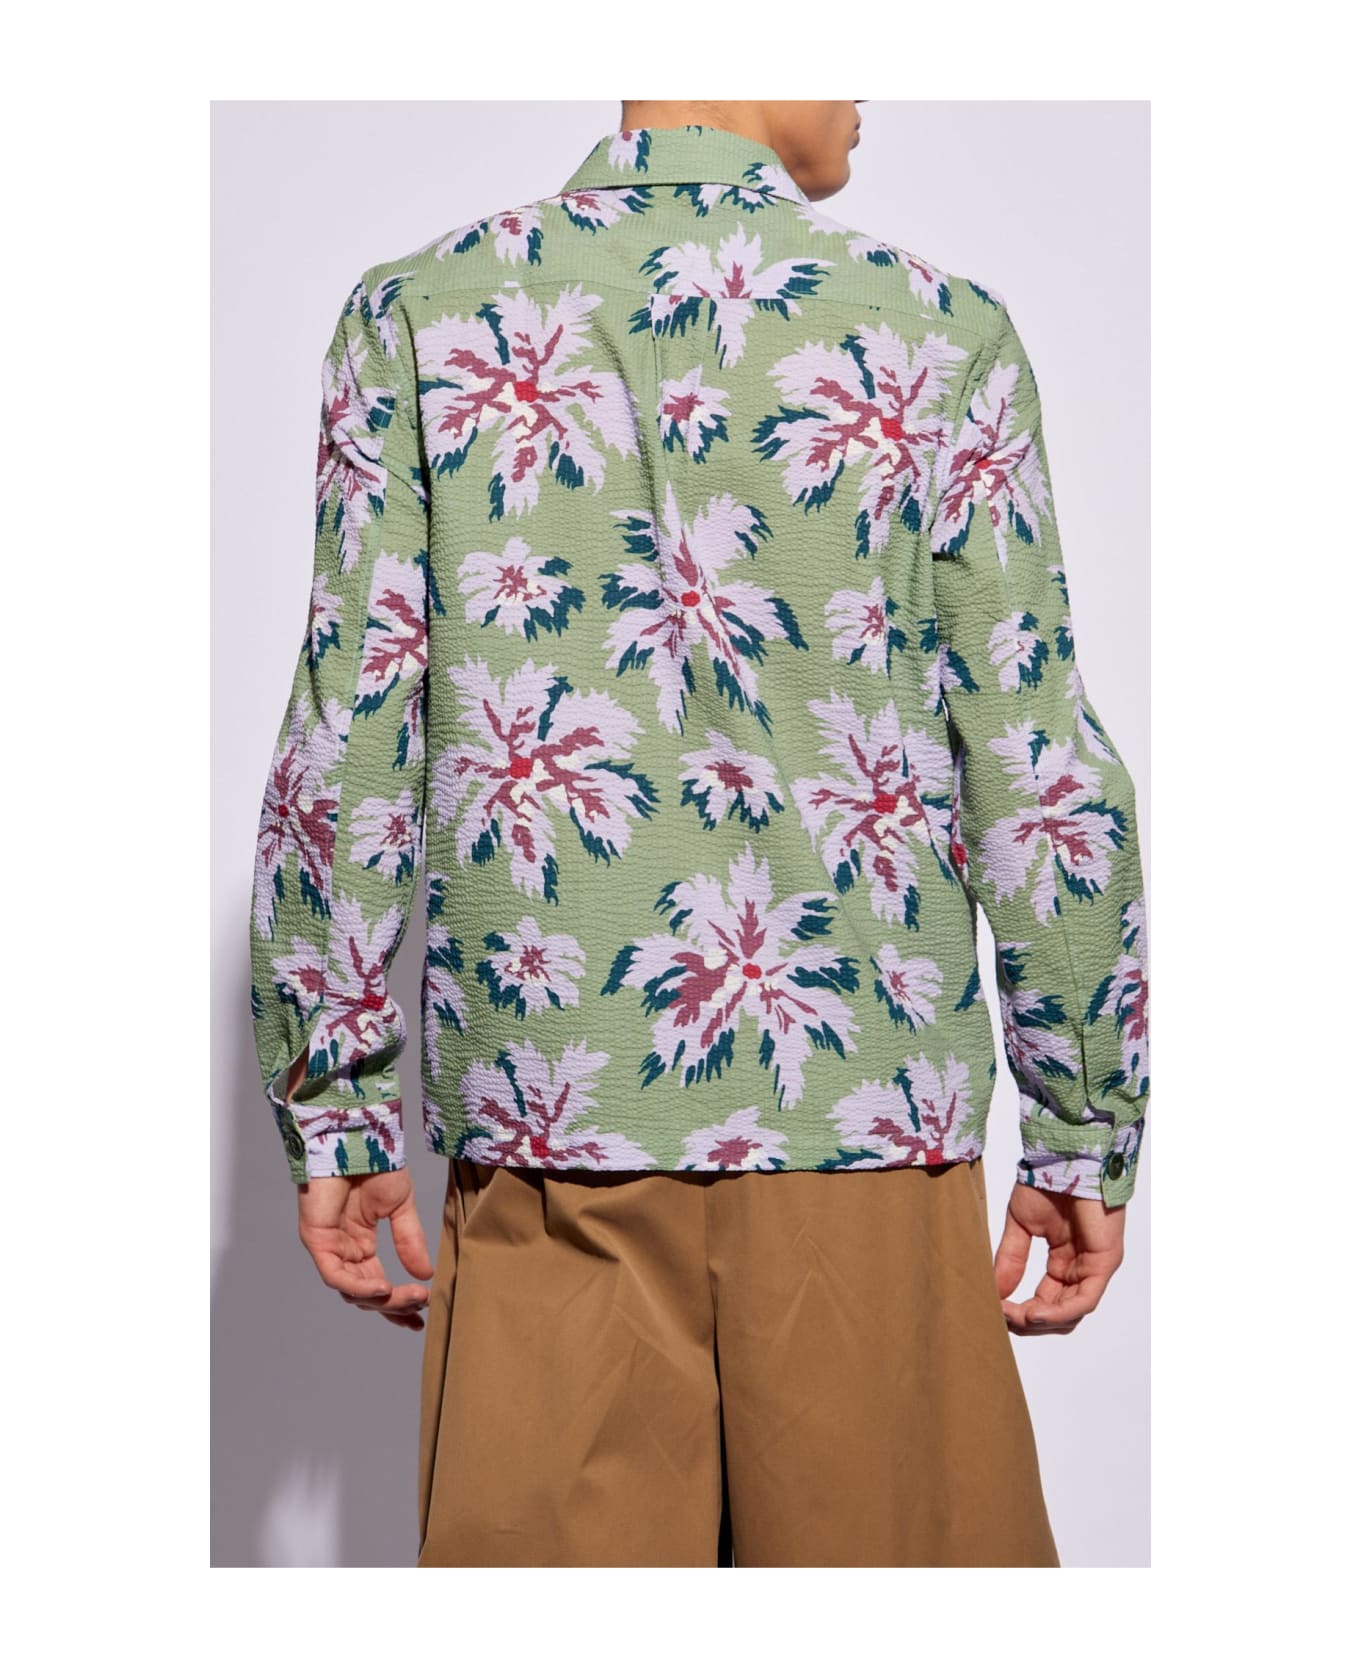 Paul Smith Ps Paul Smith Floral Shirt - MILITARY GREEN